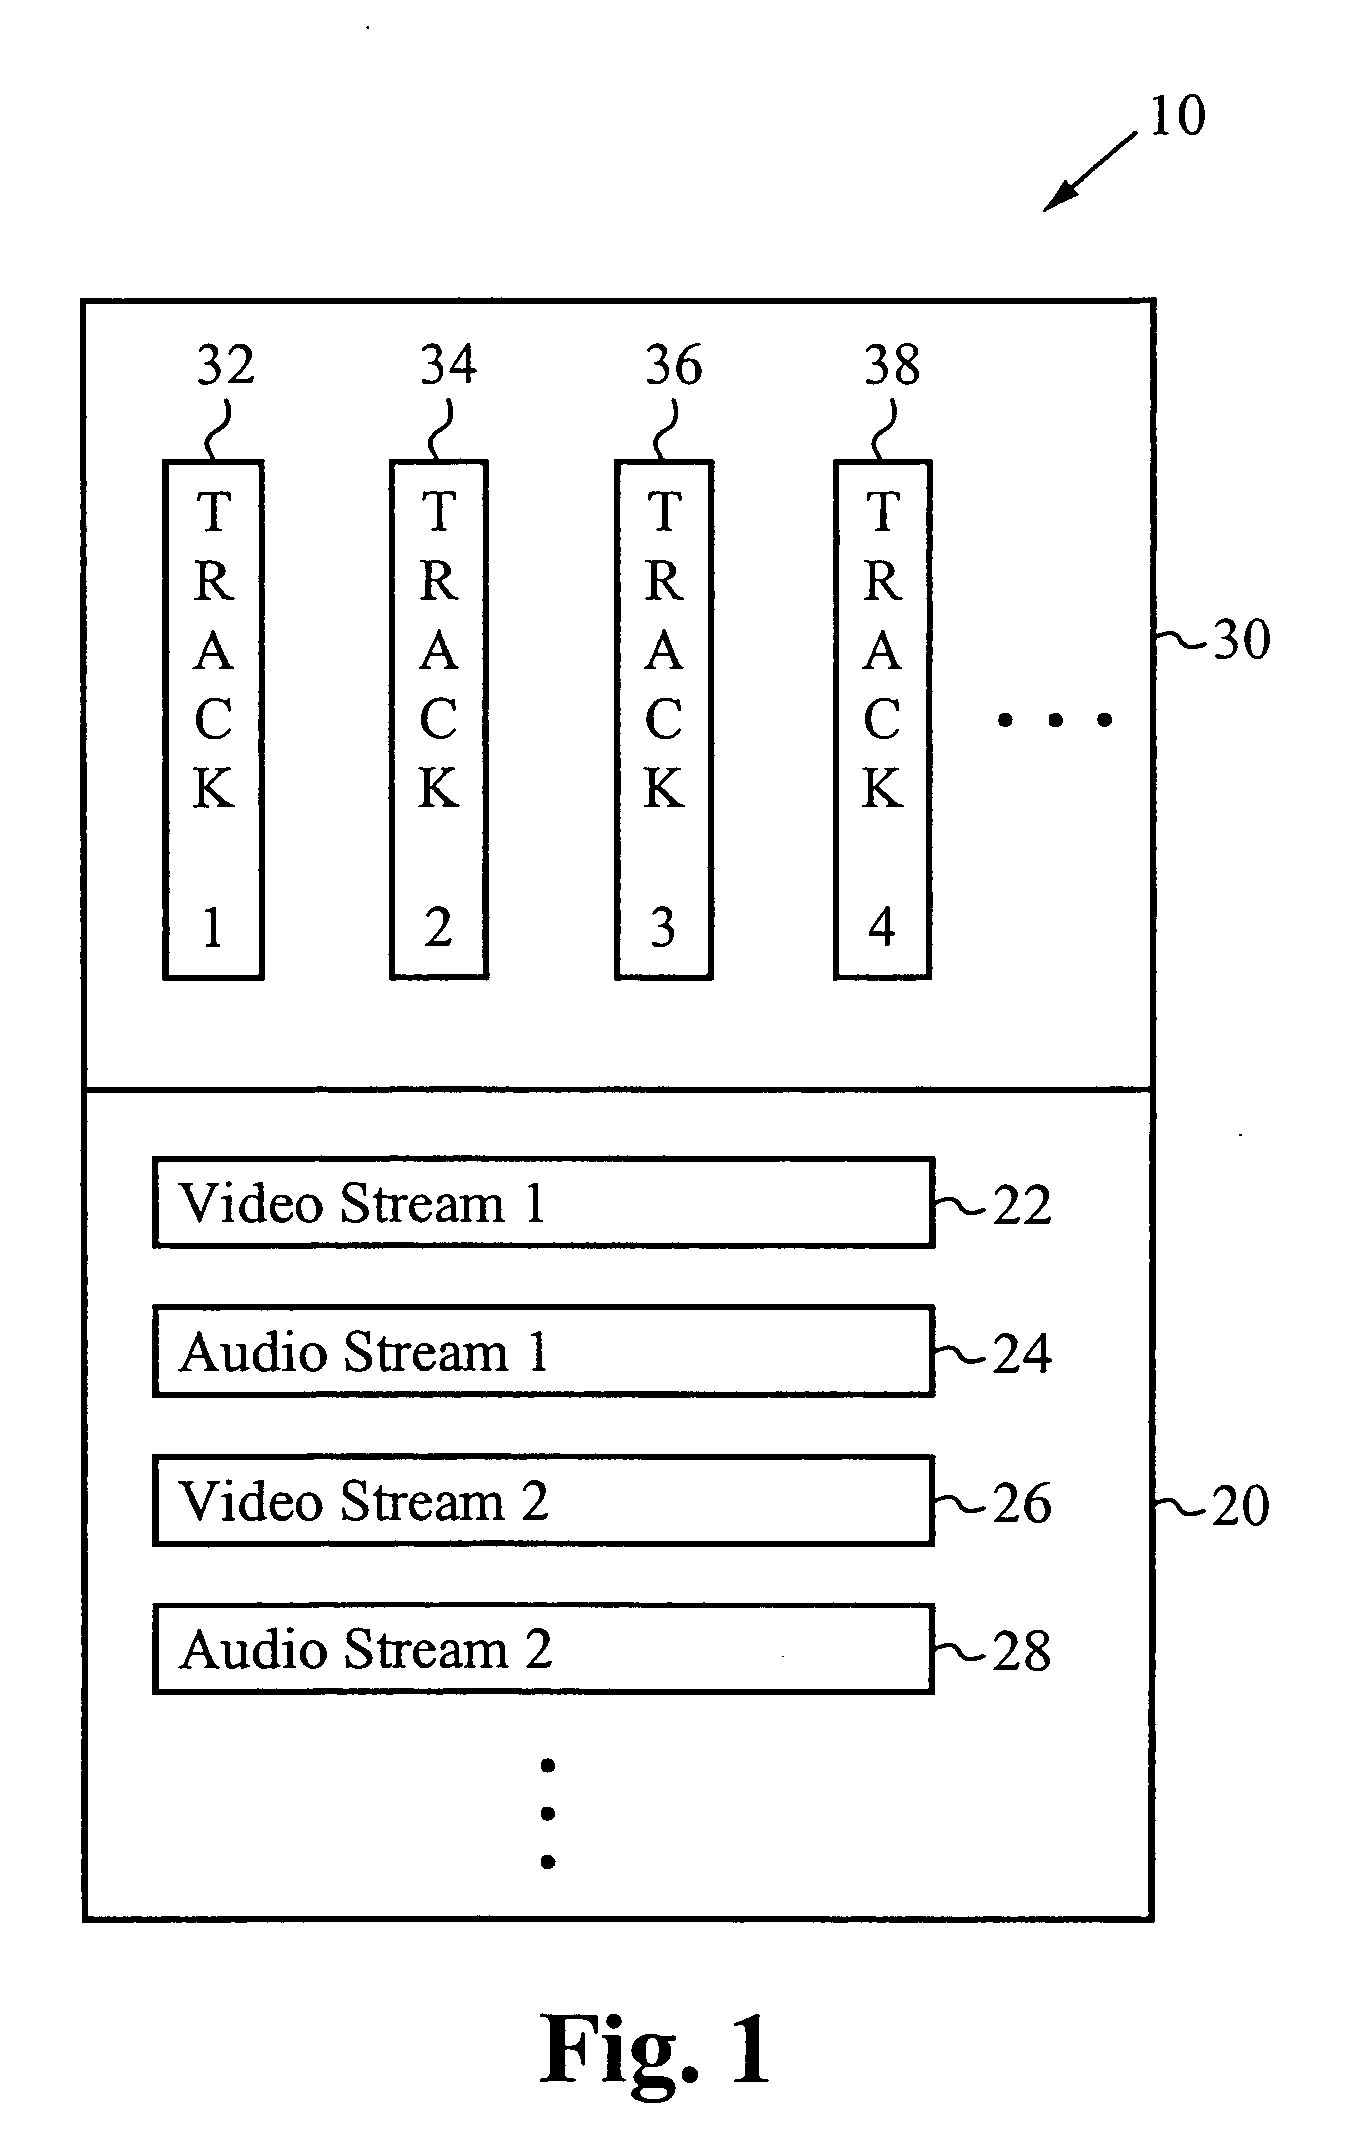 Scalable video coding (SVC) file format